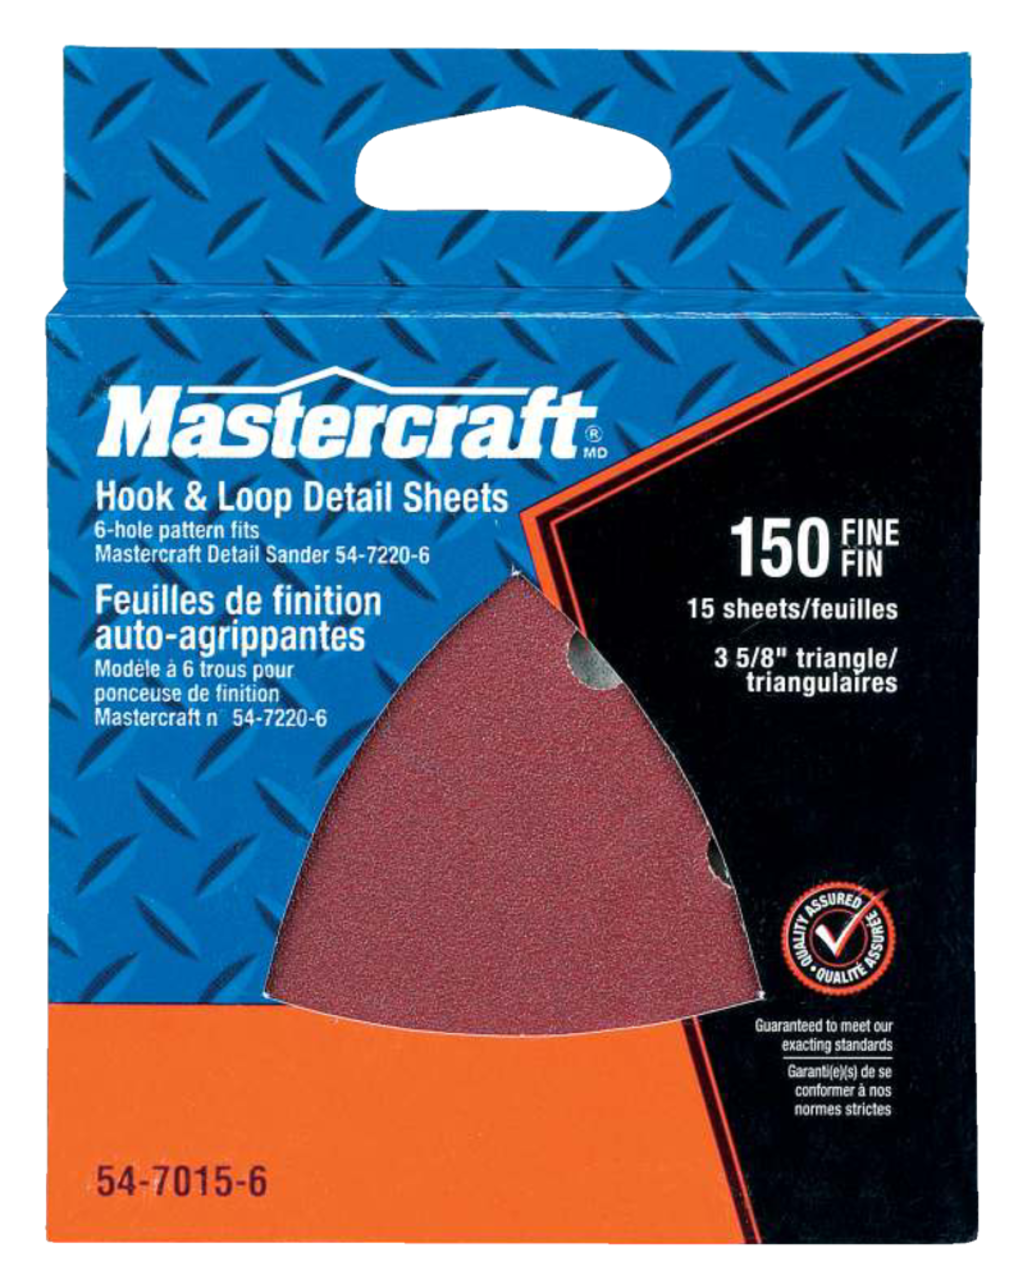 https://media-www.canadiantire.ca/product/fixing/tools/power-tool-accessories/0547015/hook-loop-sandpaper-for-054-8251-sander-150-grit-58e44bd5-3bf2-4926-b6fd-04dc775719d7.png?imdensity=1&imwidth=640&impolicy=mZoom